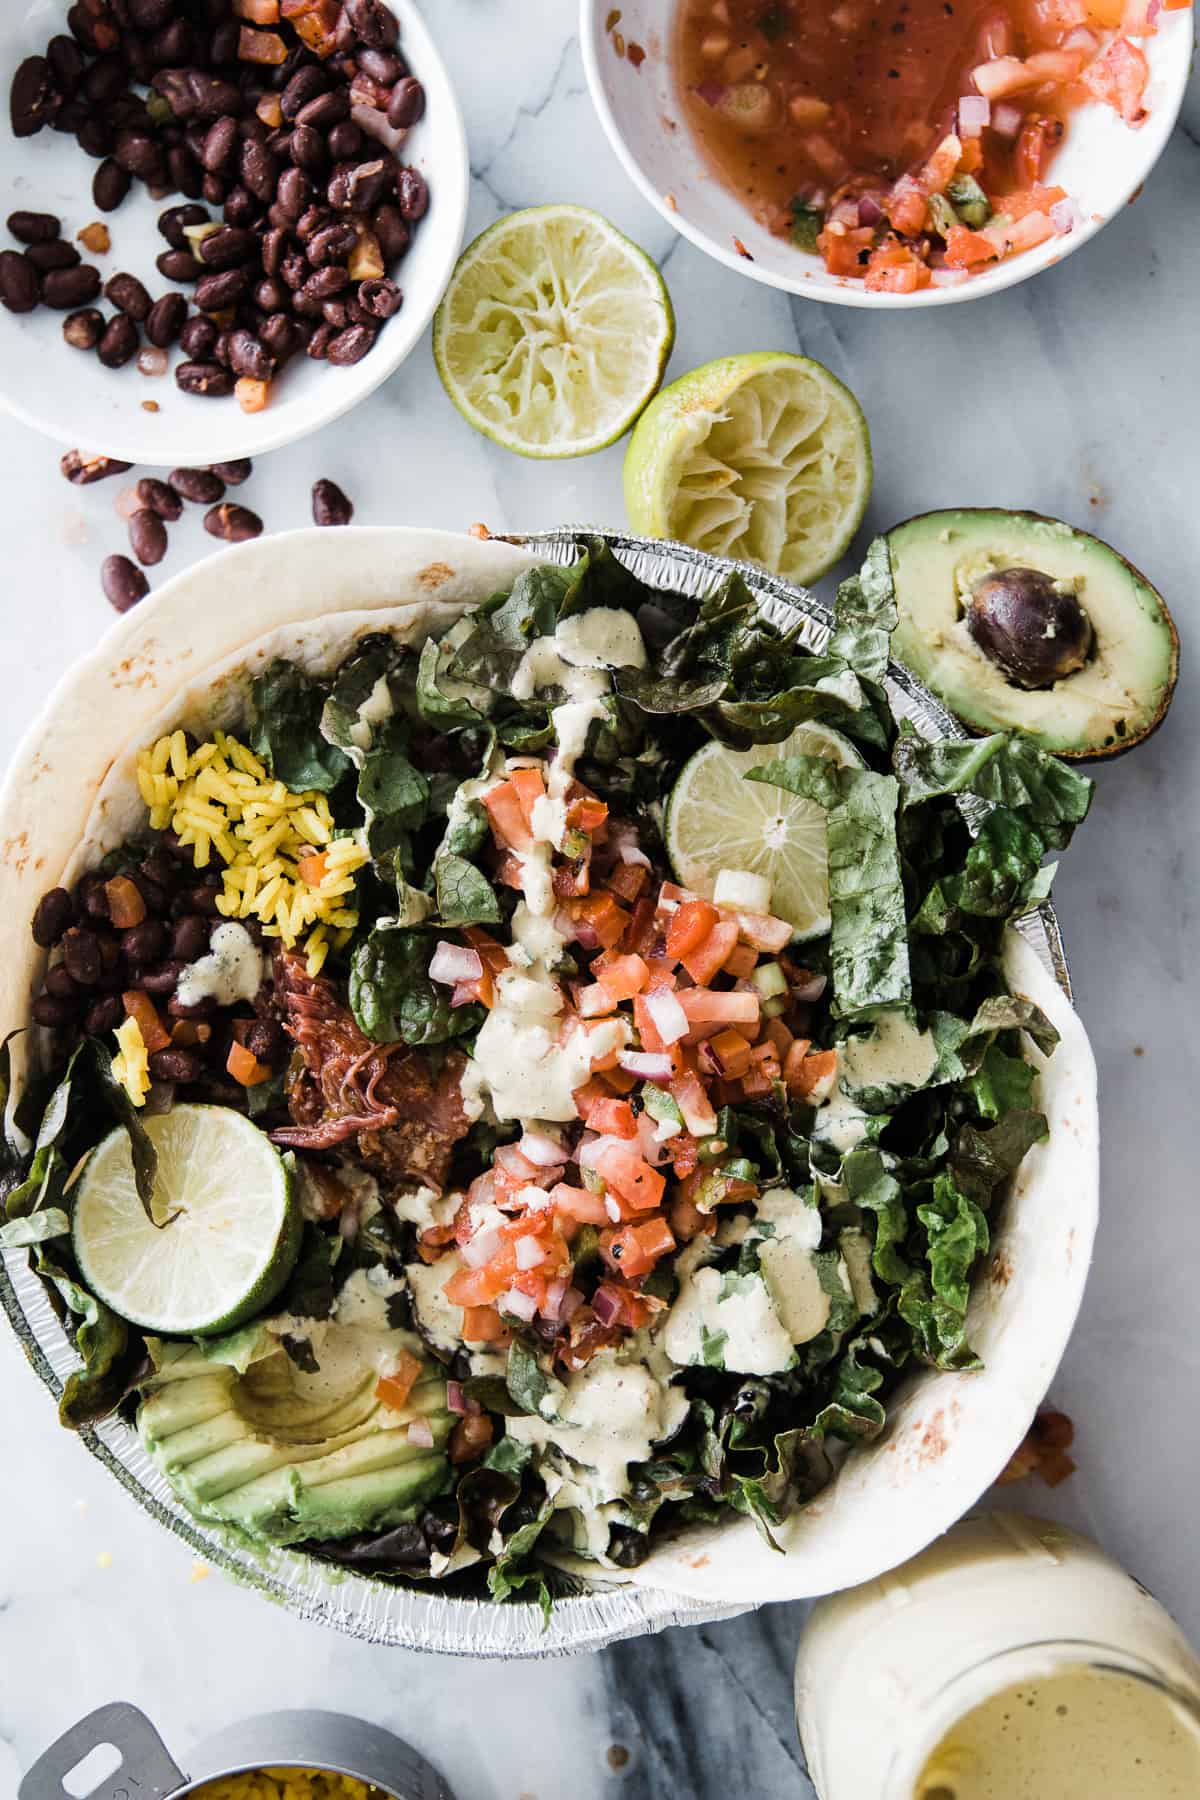 large salad with Pico de Gallo, rice, sweet pulled pork, avocado